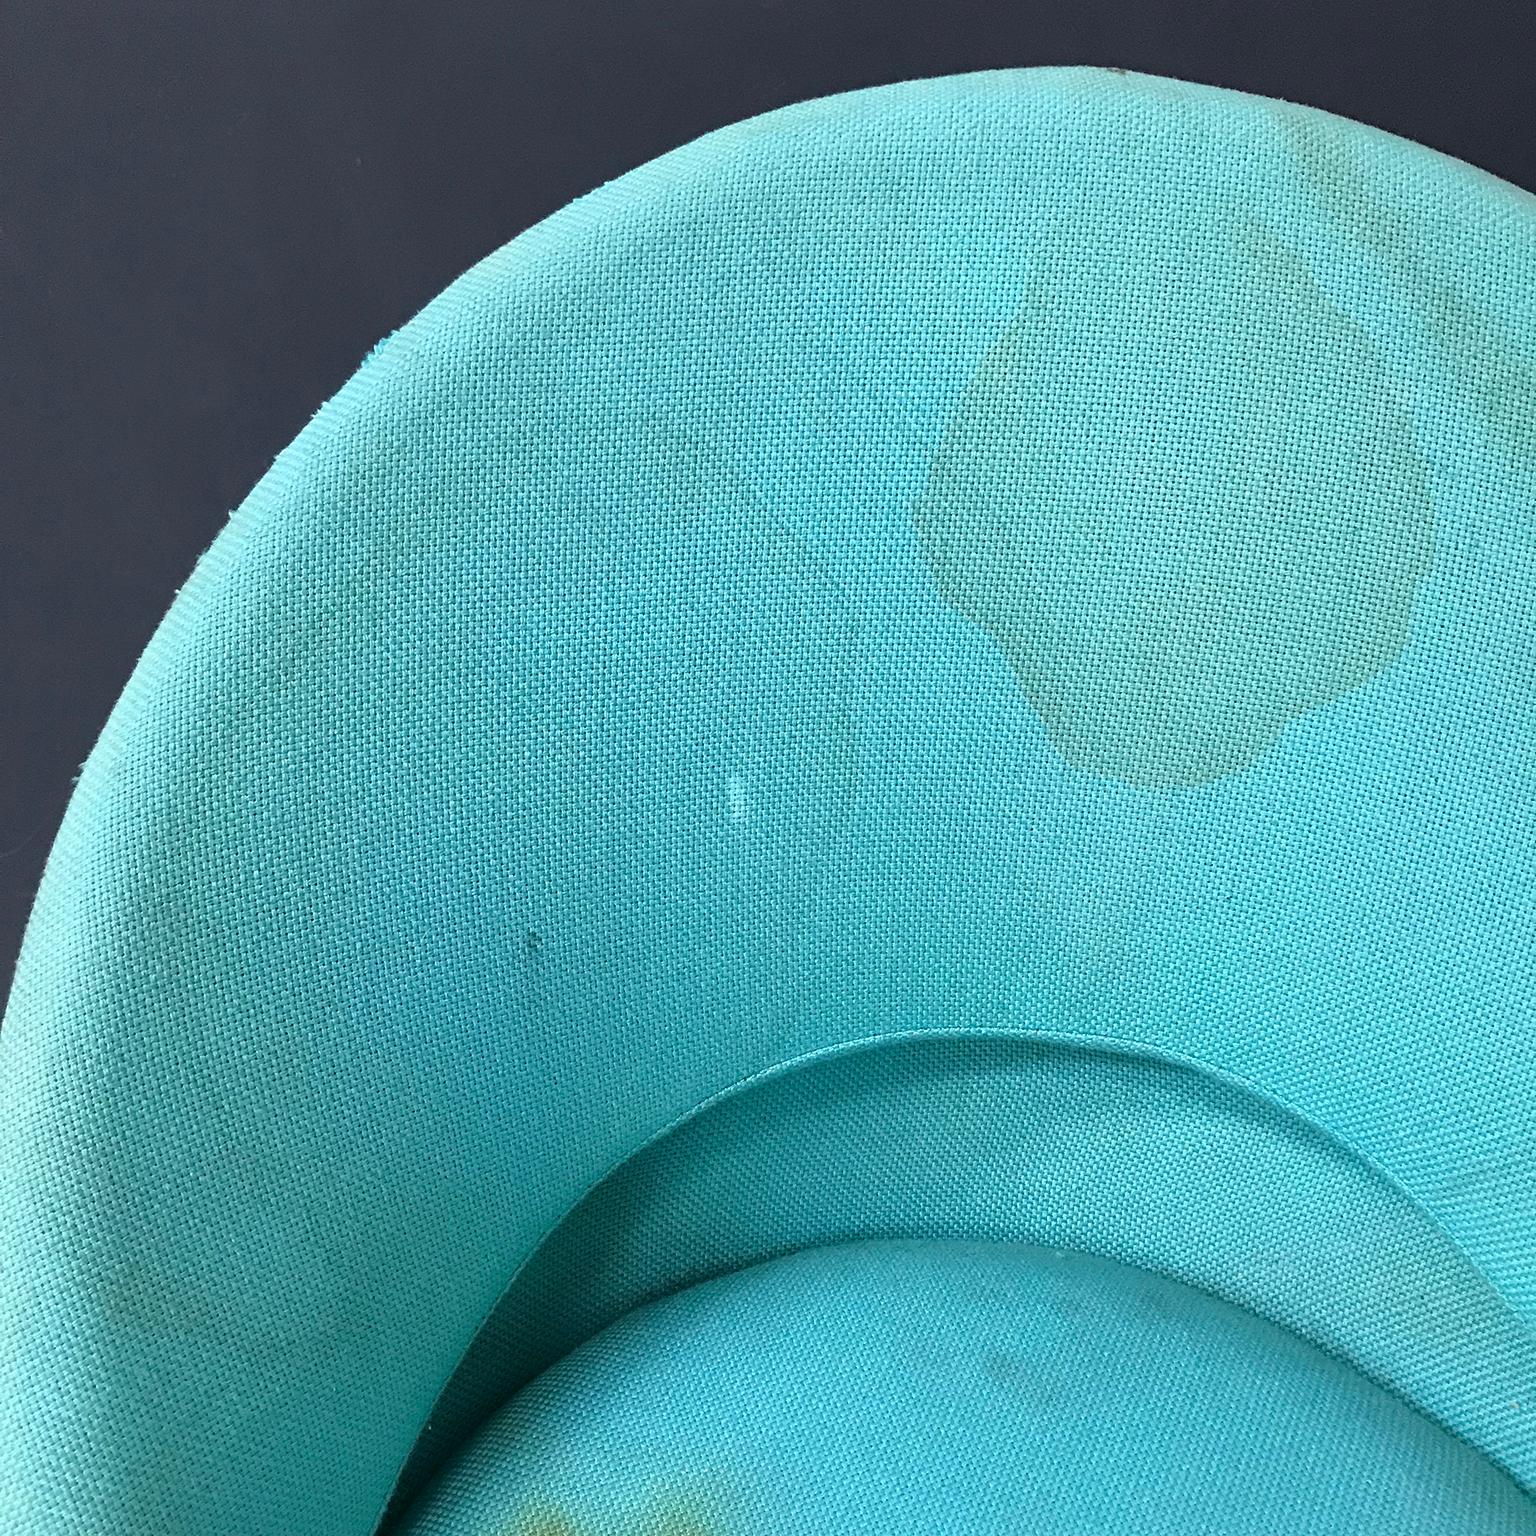 1958, Verner Panton for Rosenthal, Cone Chair in Original Turquoise Fabric 3